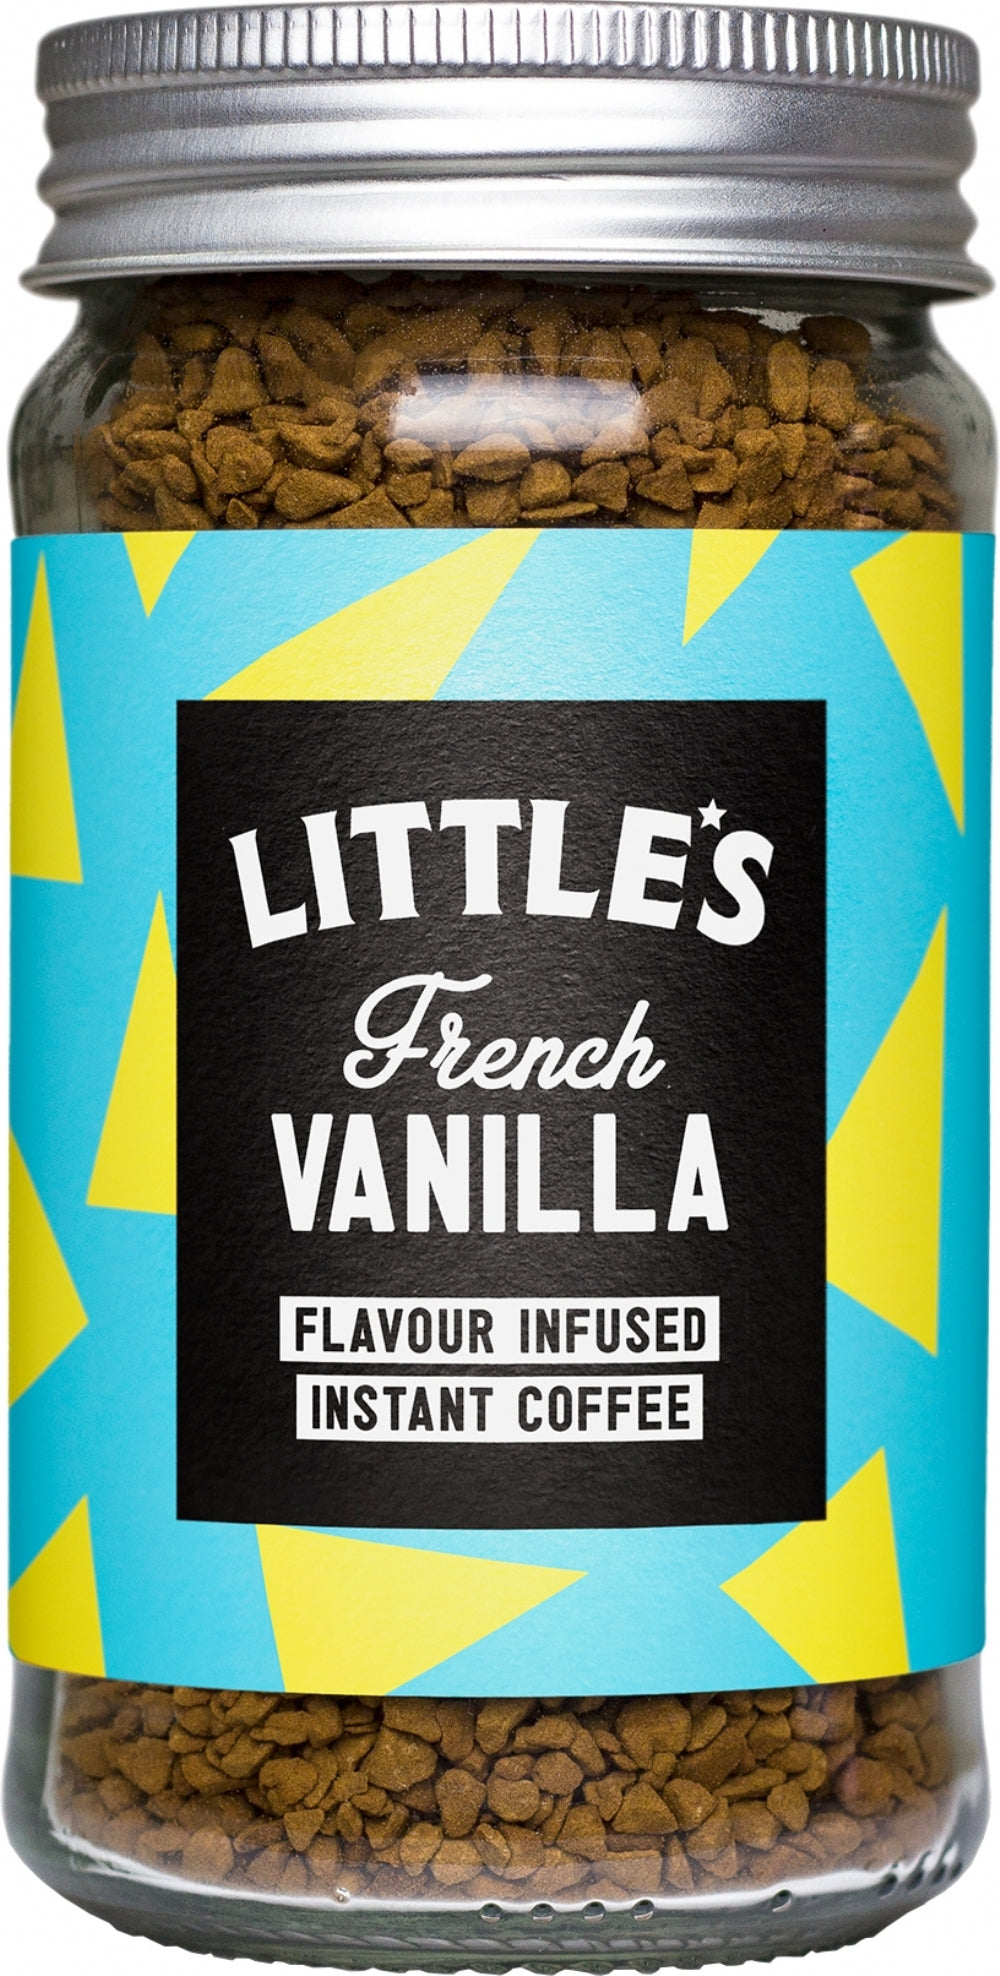 Little's French Vanilla Flavour Instant Coffee